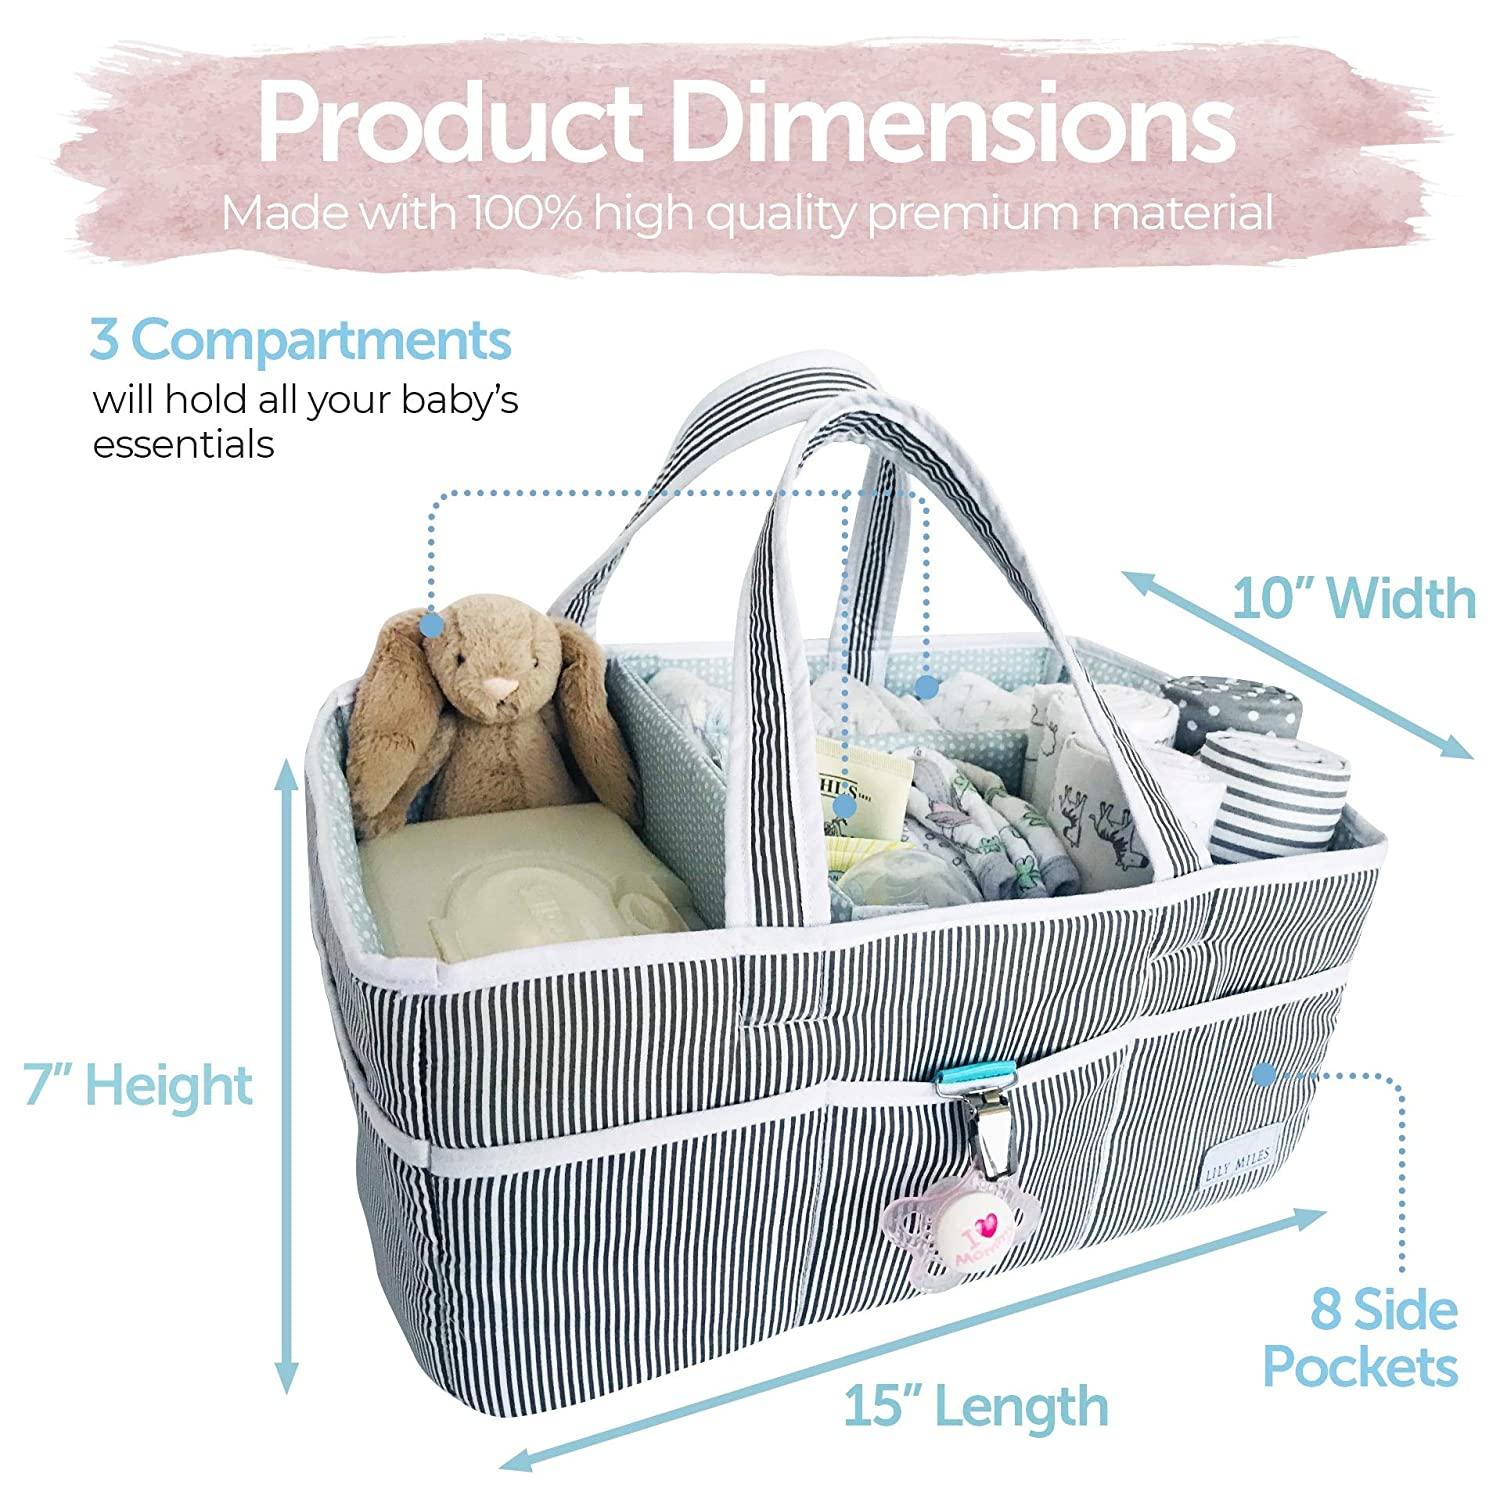 Lily Miles Baby Diaper Caddy - Large Organizer Tote Bag for Infant